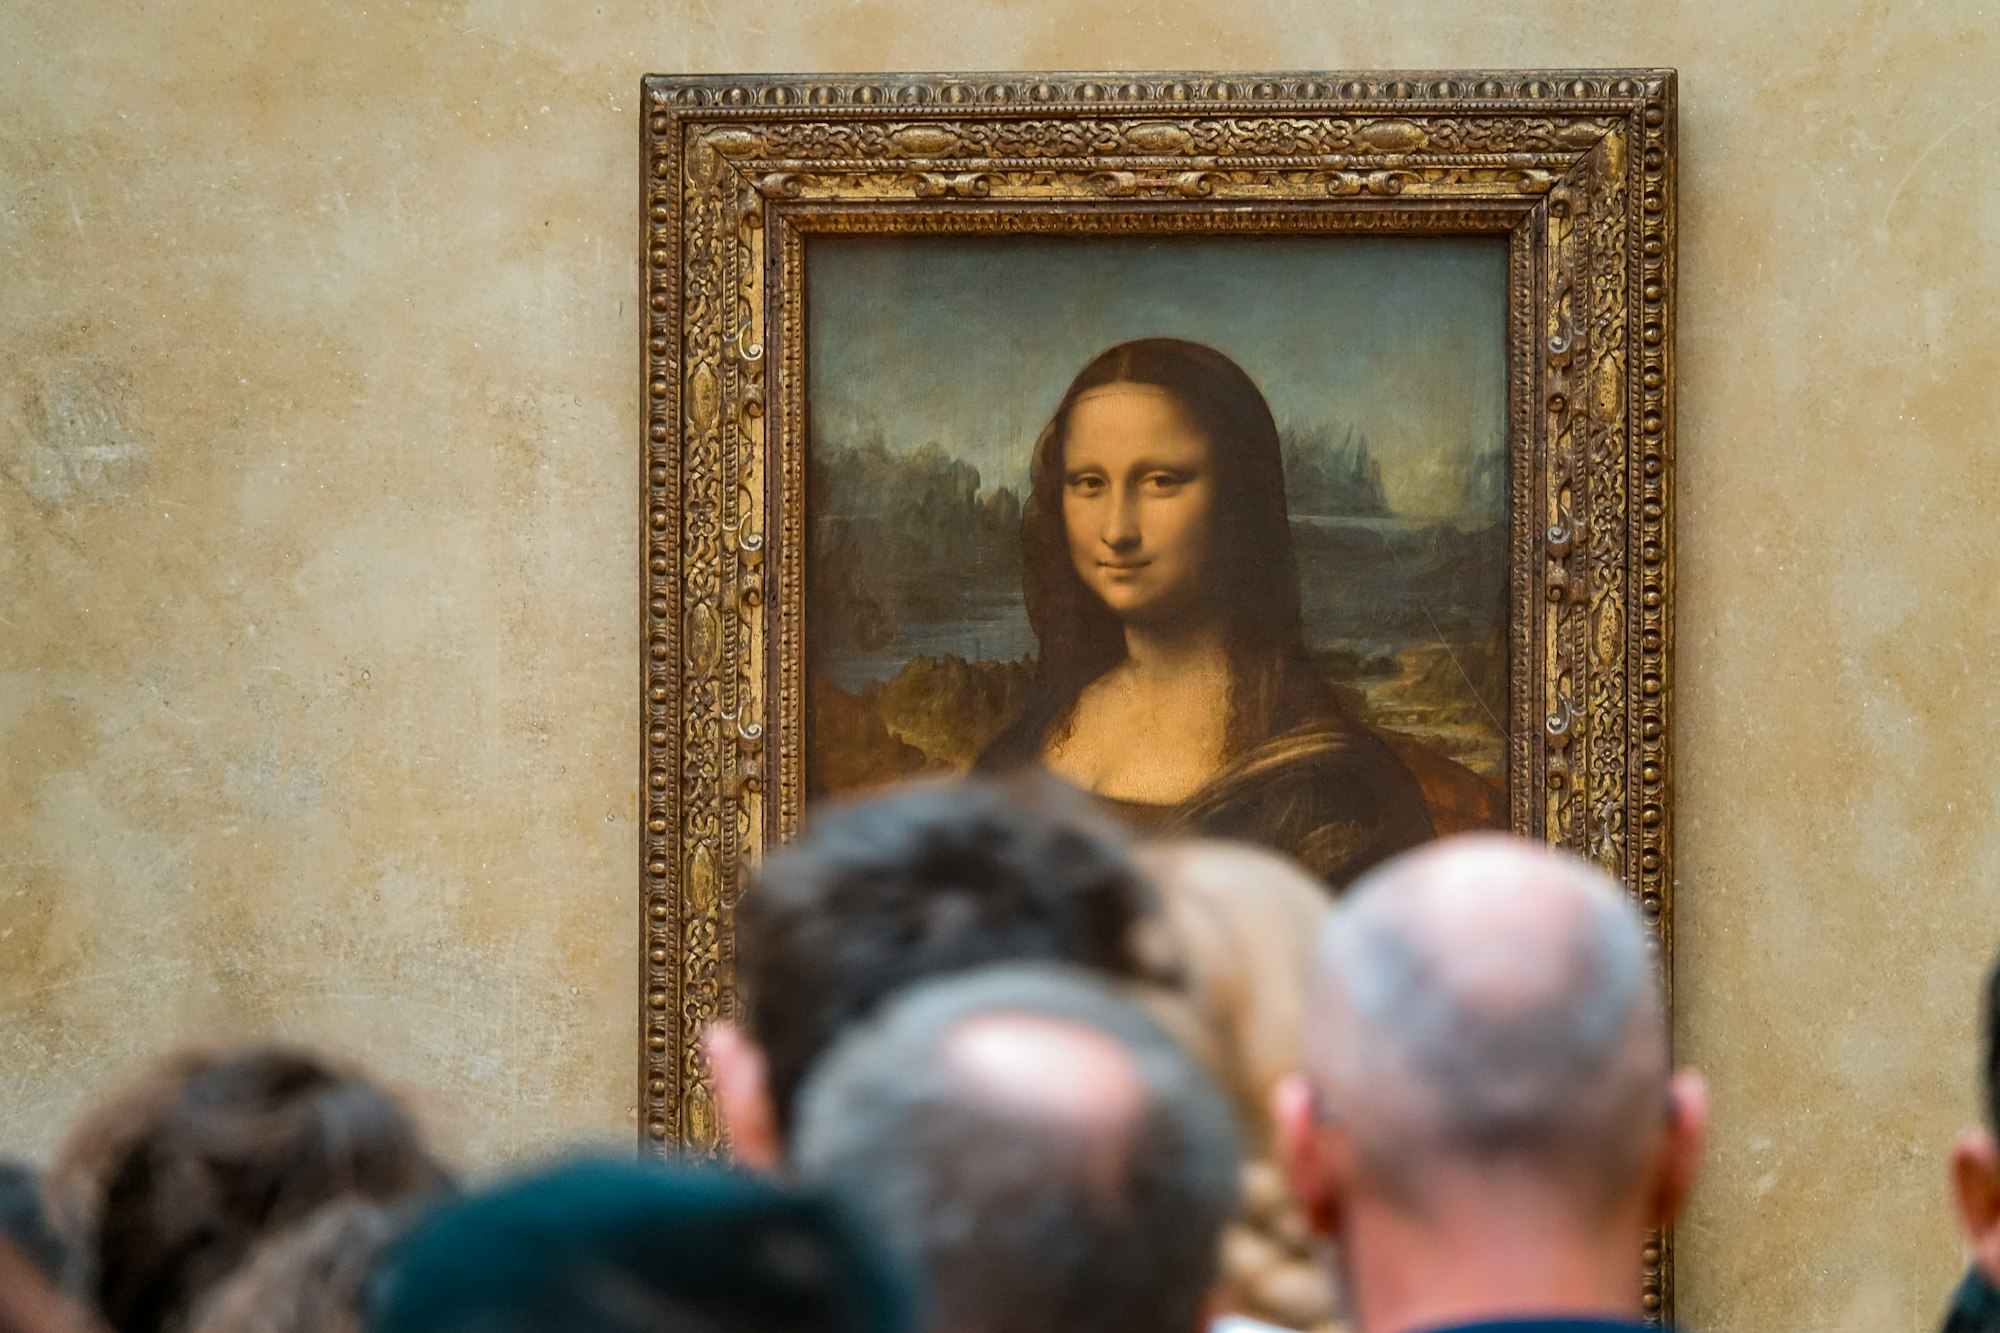 The Mona Lisa, as seen from the crowds around it